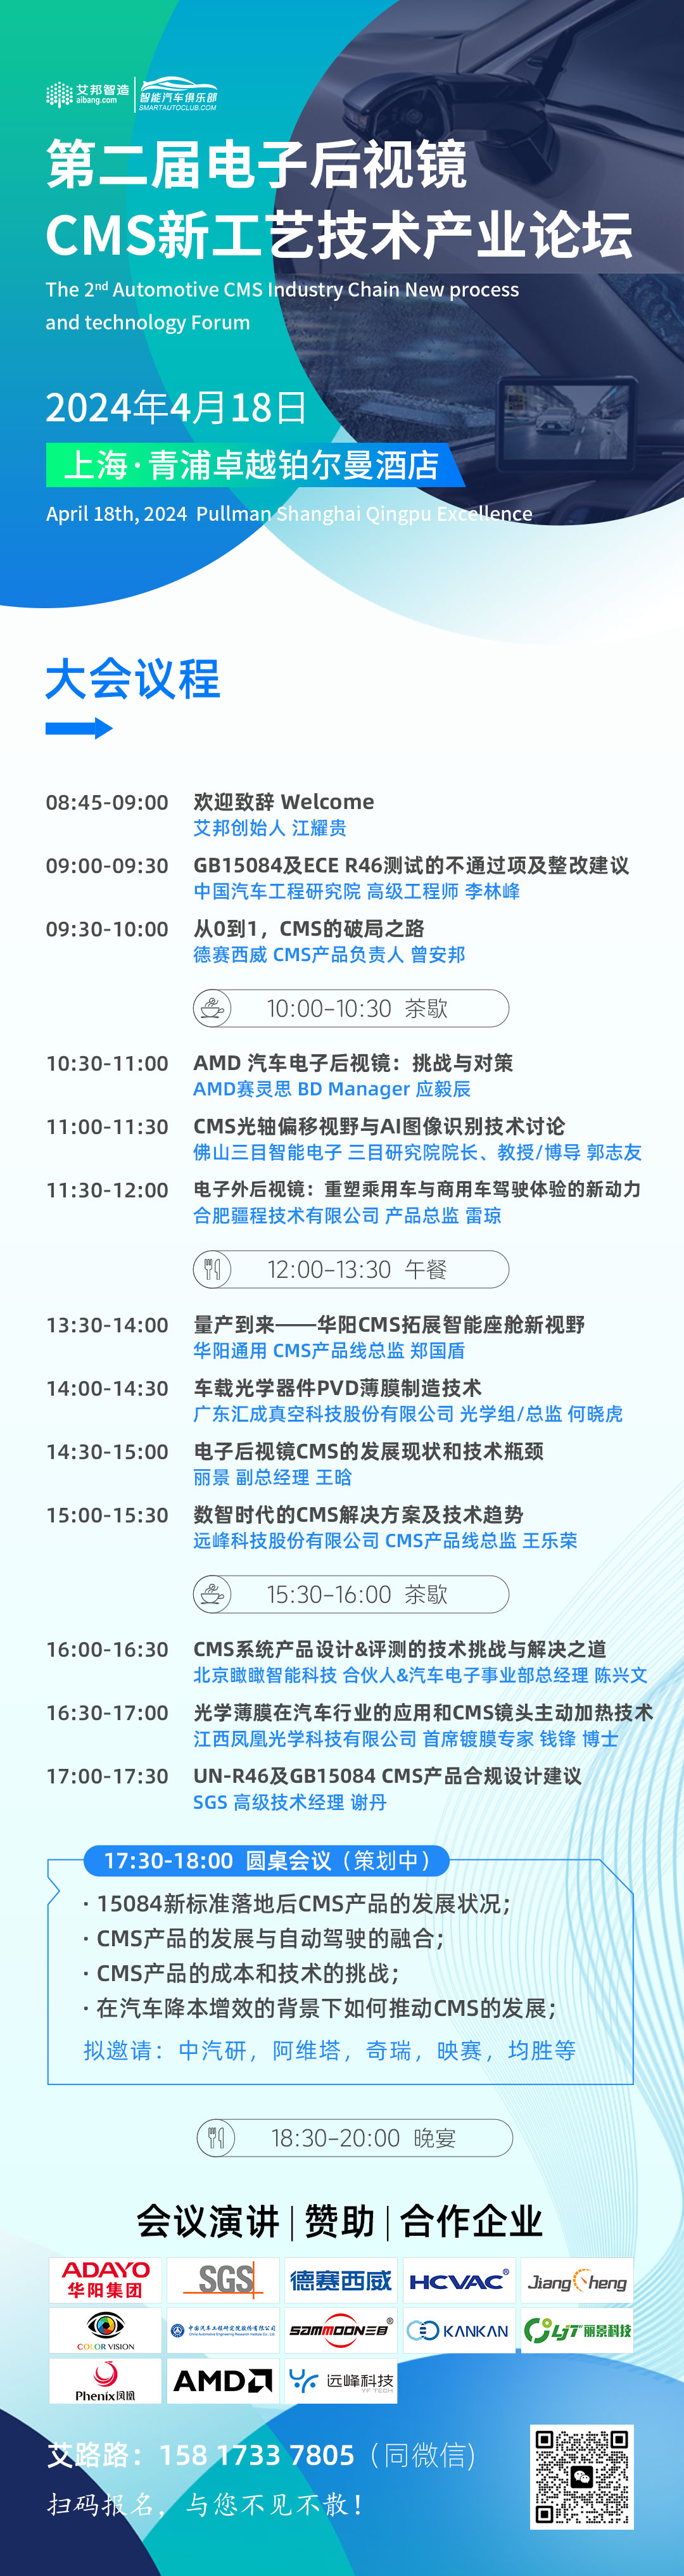 Yuanfeng Technology Keynote Speech-"CMS Solutions and Technology Trends in the Digital Intelligence Era"